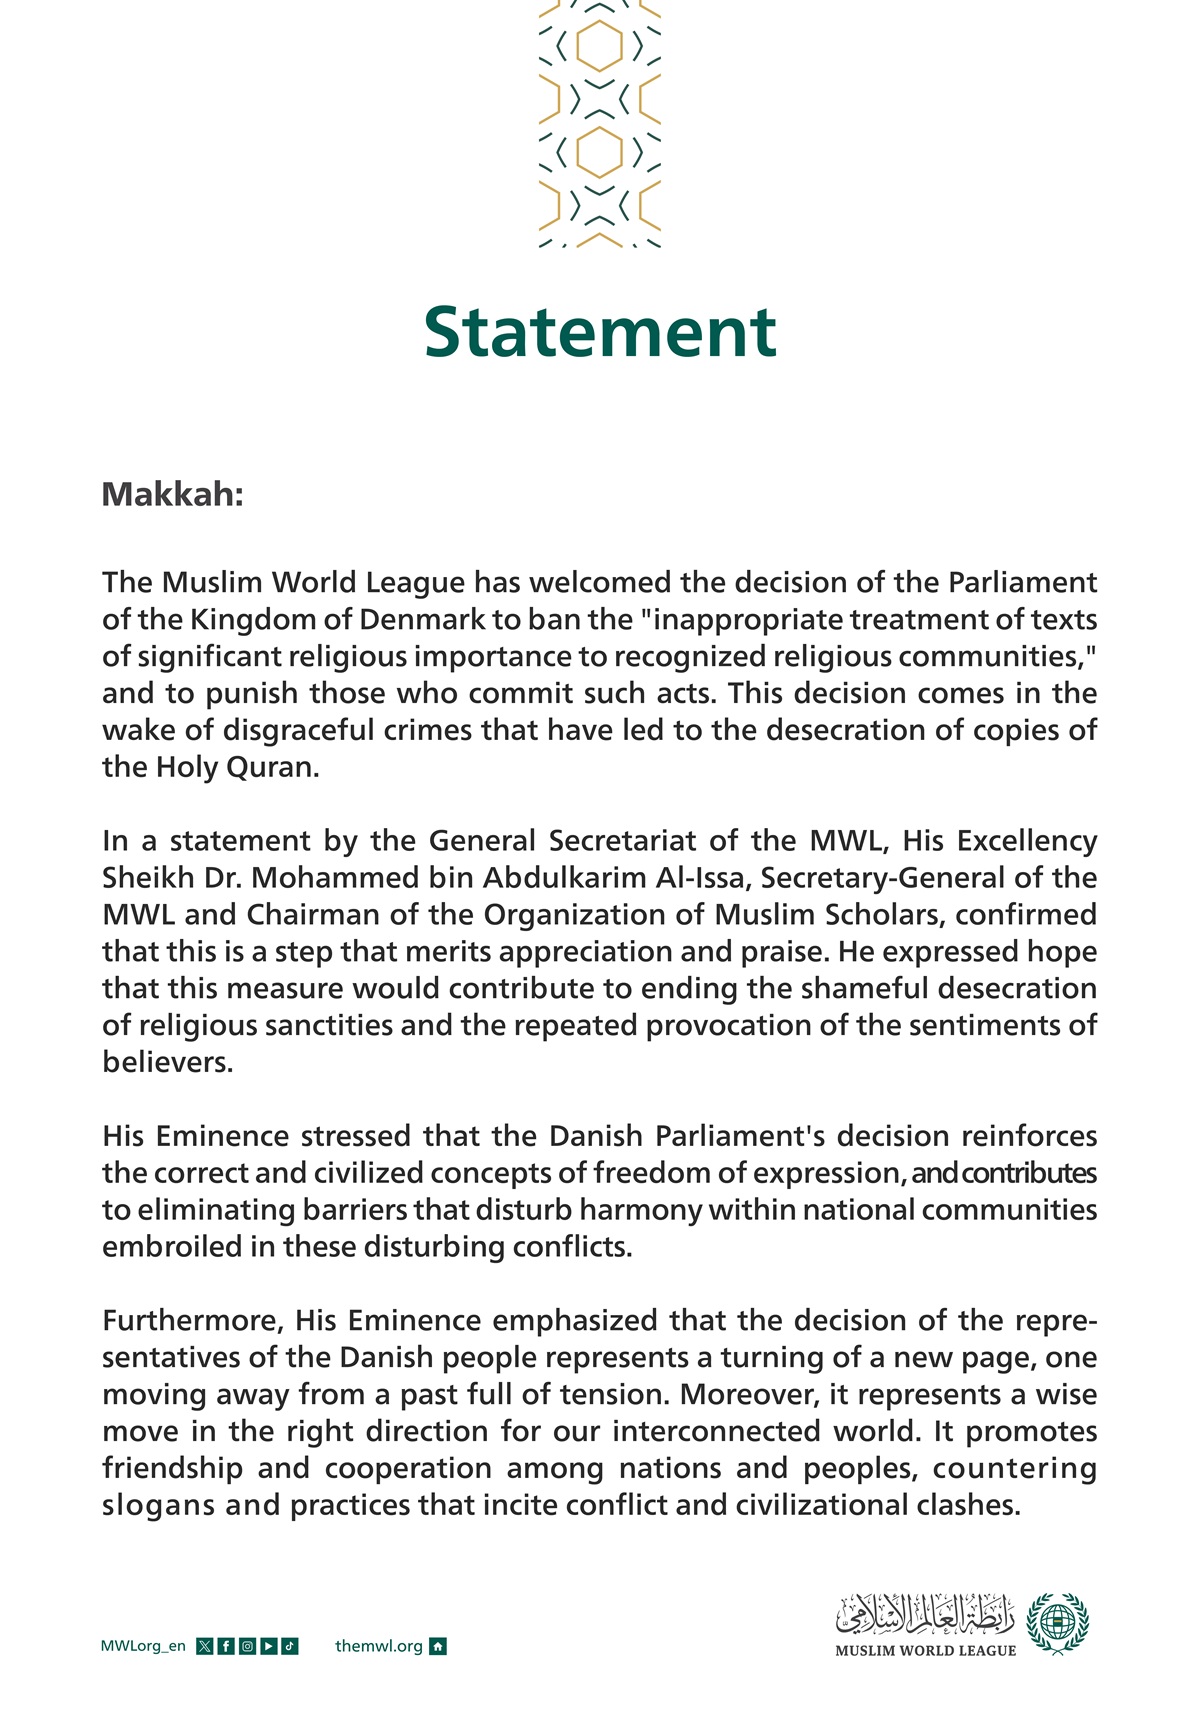 The Muslim World League has welcomed the decision of the Parliament of the Kingdom of Denmark to ban the "inappropriate treatment of texts of significant religious